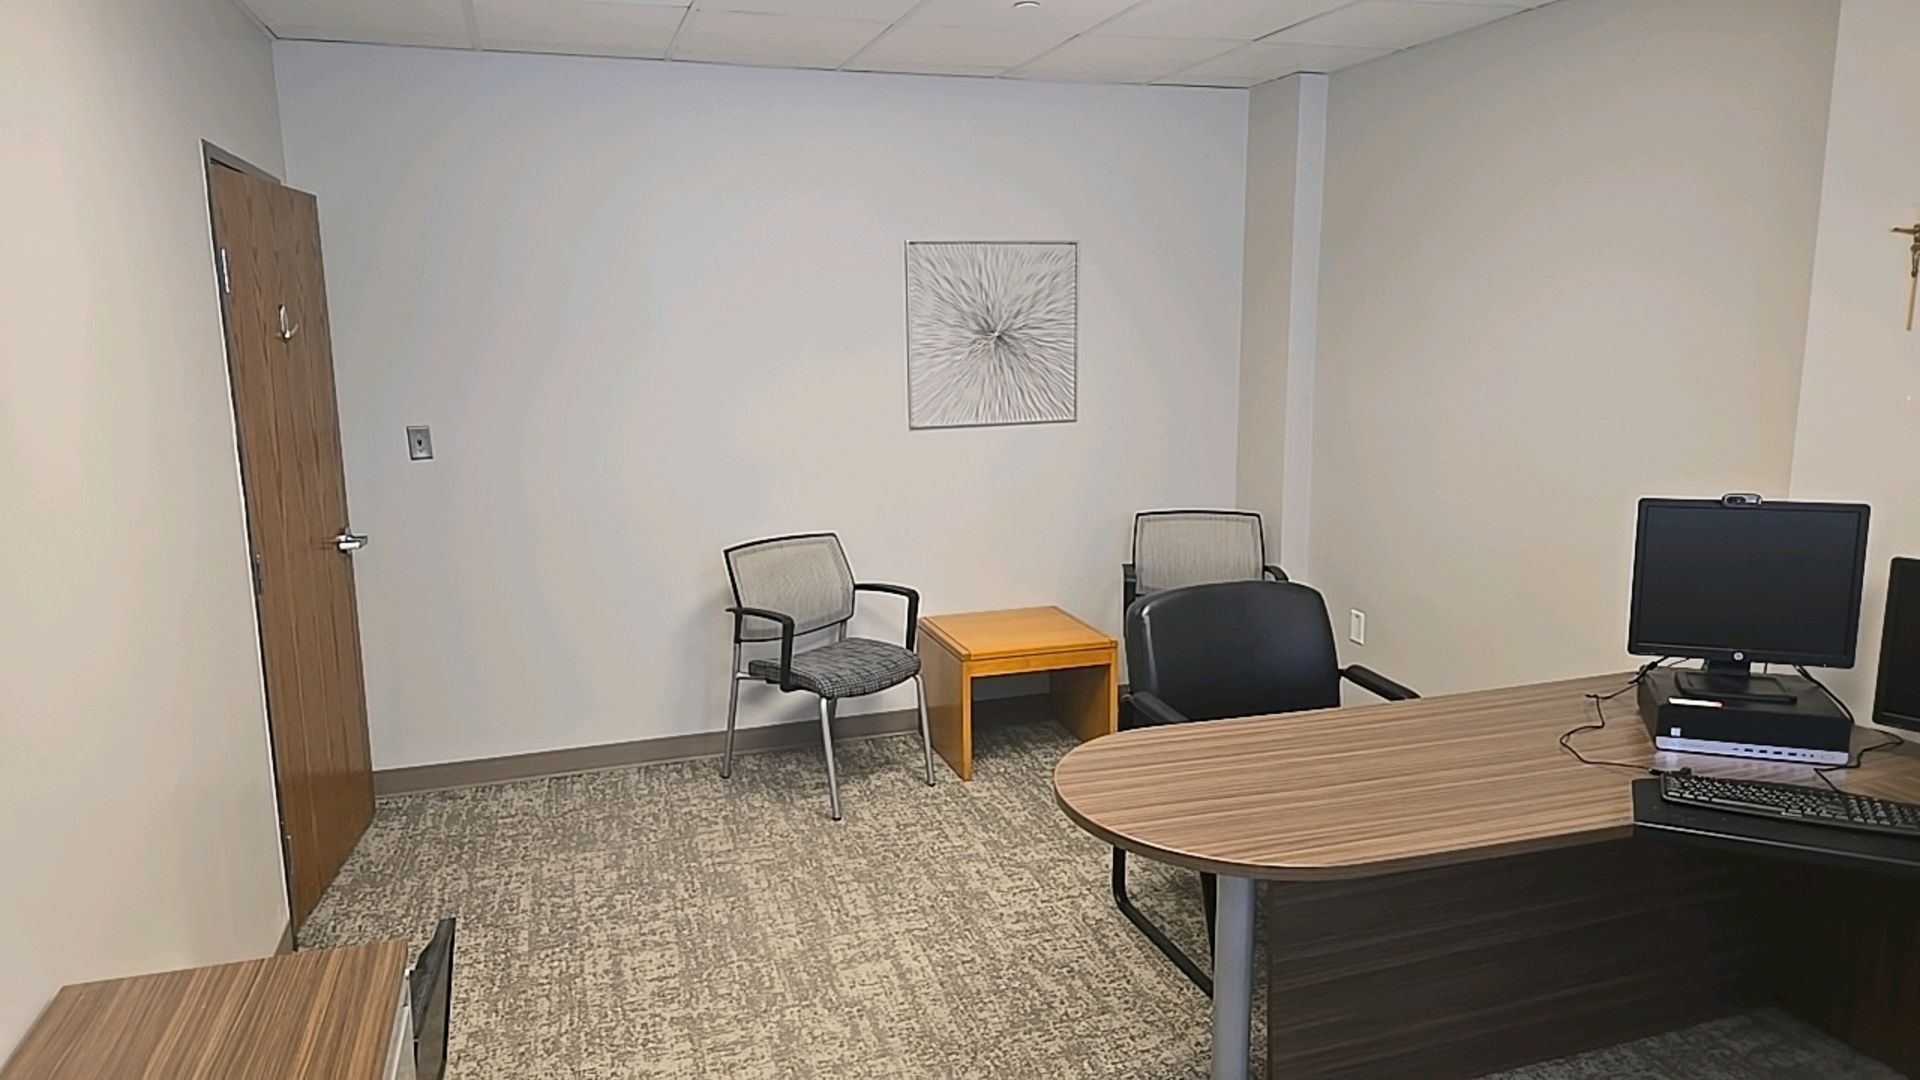 OFFICE TO INCLUDE: L-SHAPE DESK WITH OVERHEAD STORAGE, BULLETIN BOARD/ORGANIZER RACK, CHAIRS, TABLE, - Image 2 of 2